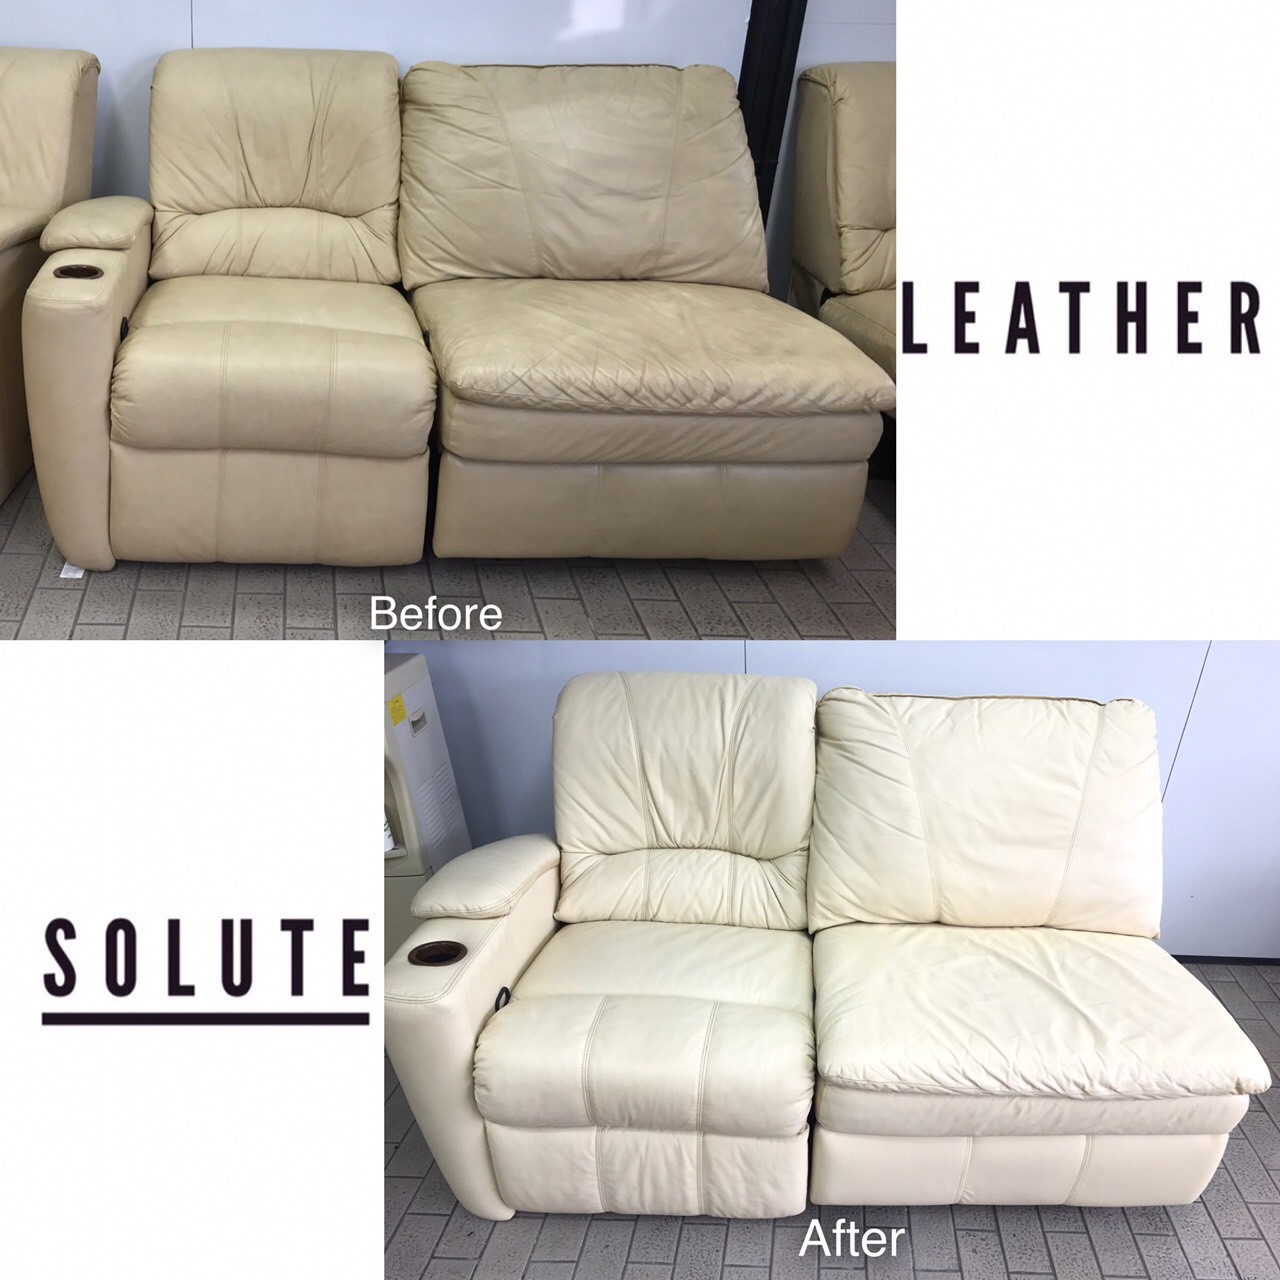 //www.leathersolute.co.th/wp-content/uploads/2018/12/Cleaning-furniture_๑๘๑๒๓๐_0006.jpg